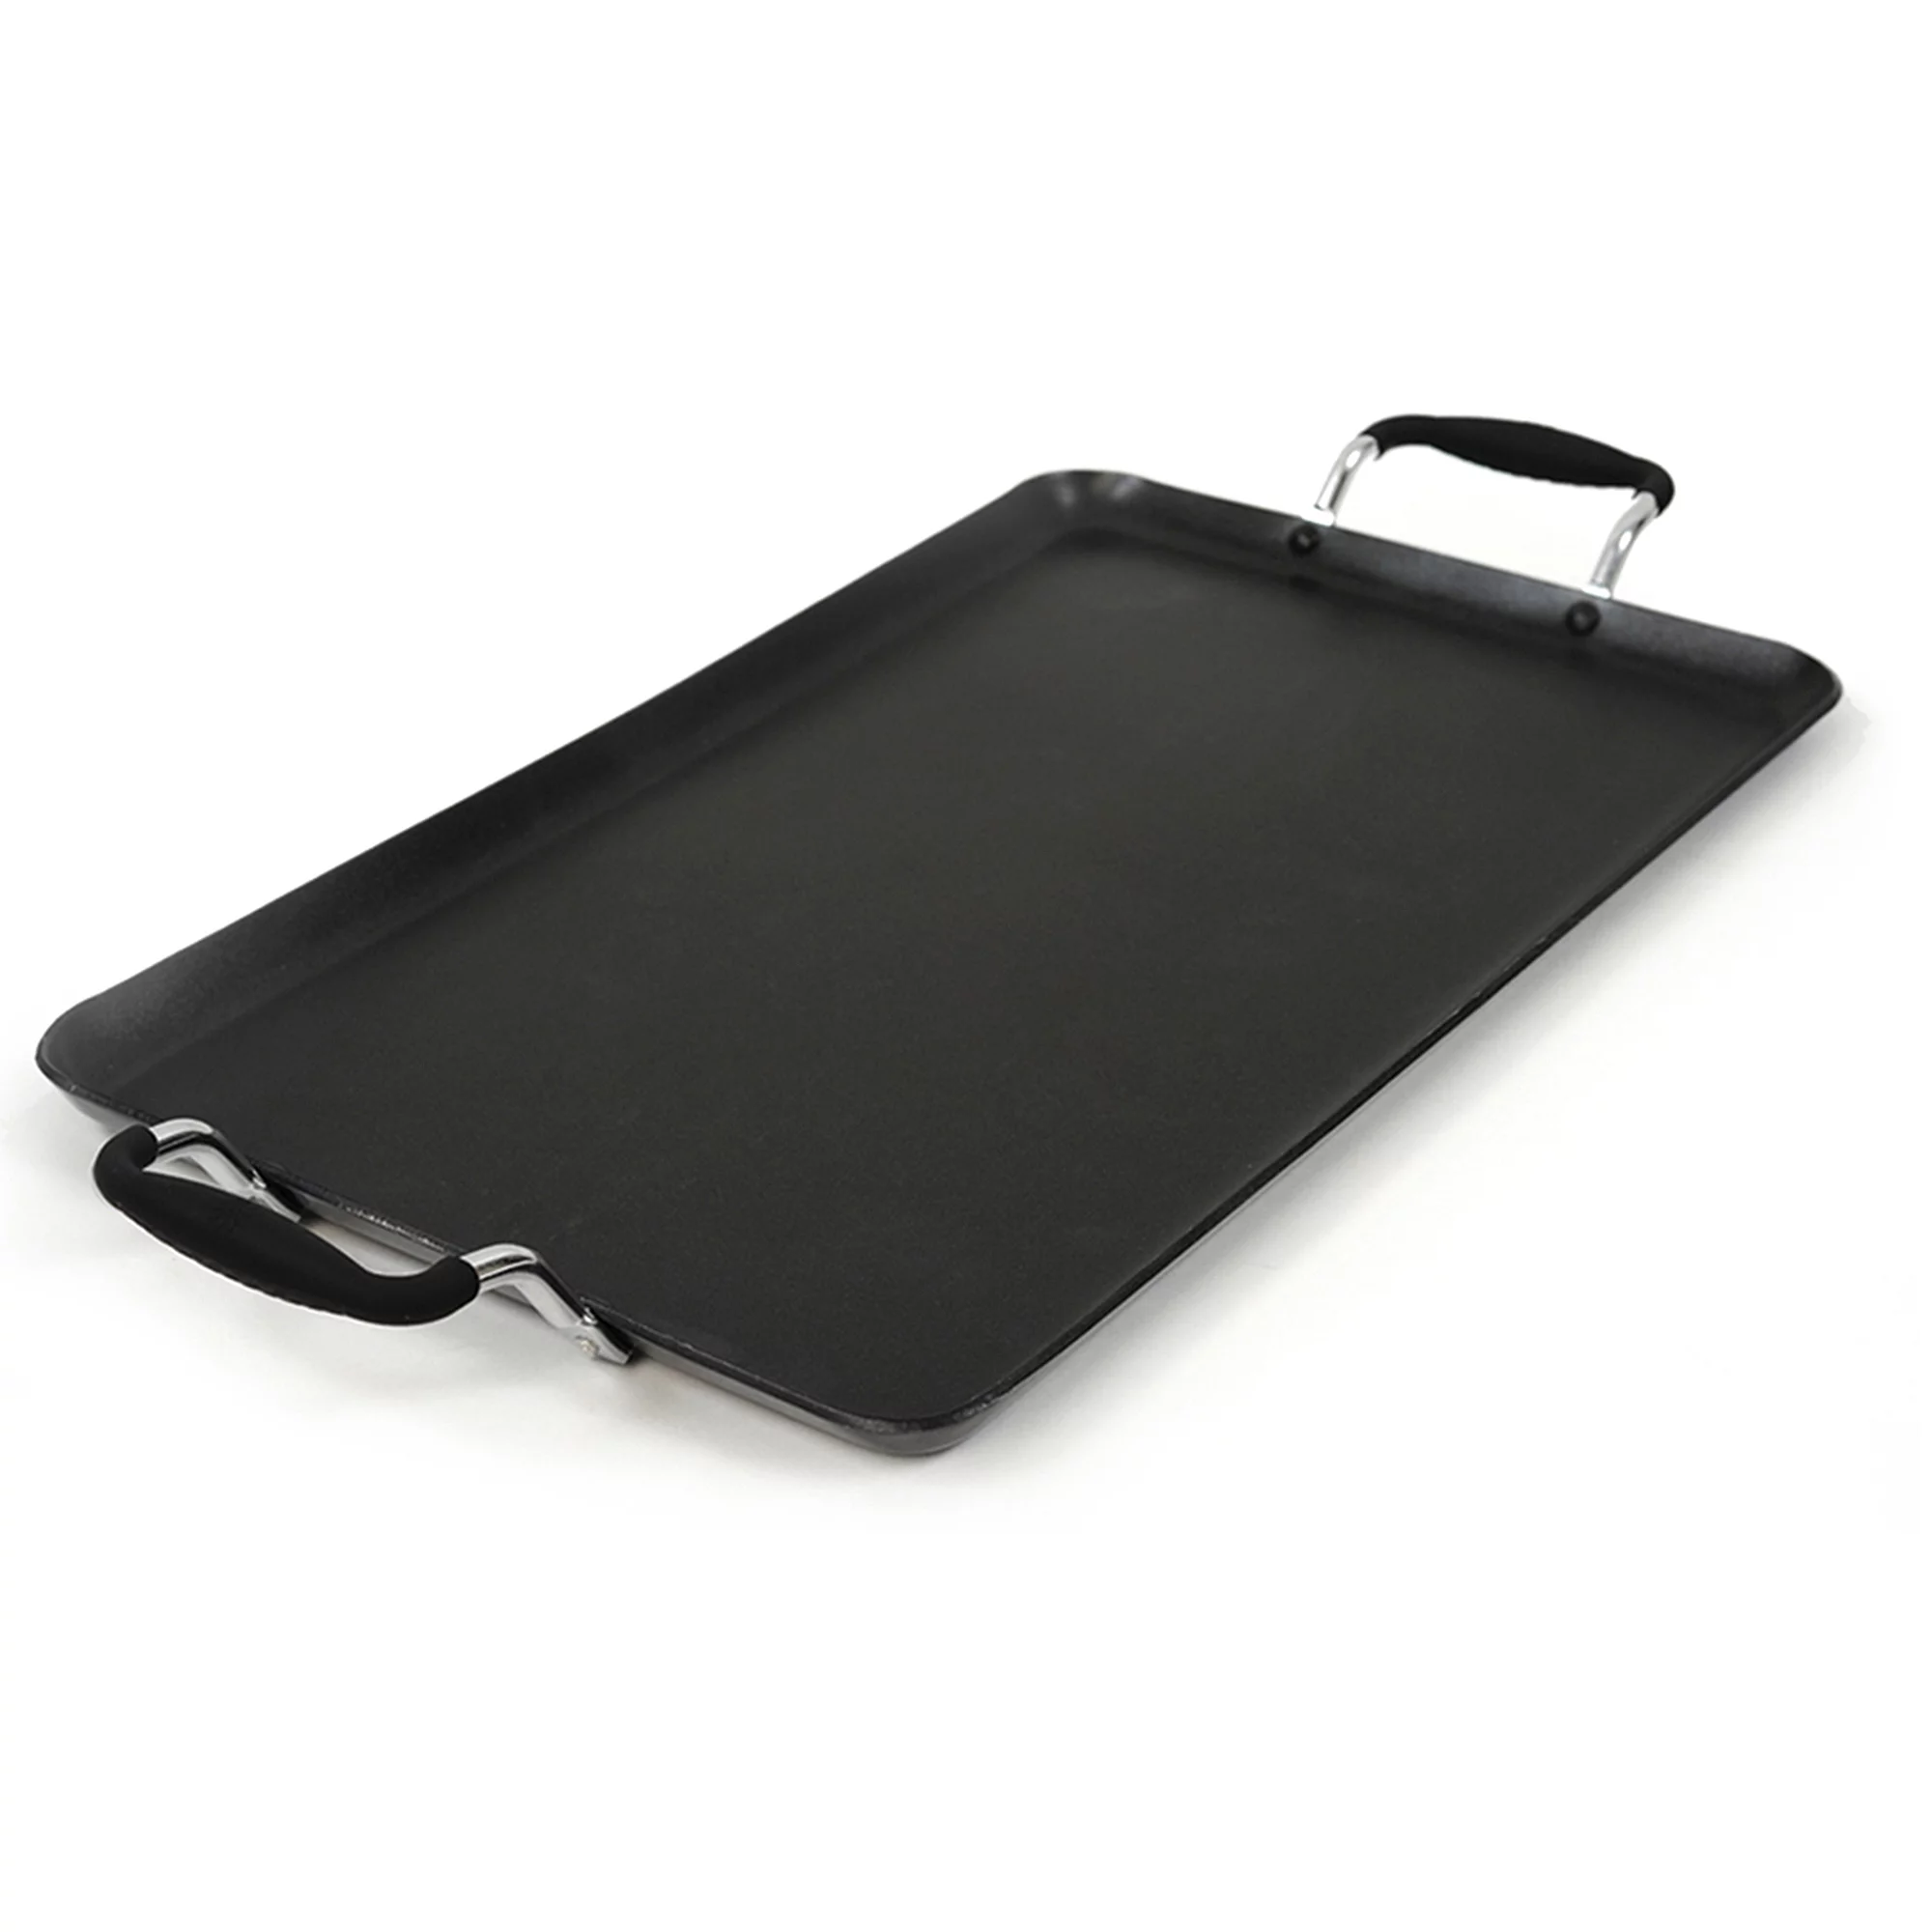 Nonstick Double Burner Griddle With Metal Handles 20 X 12 Inch Black 